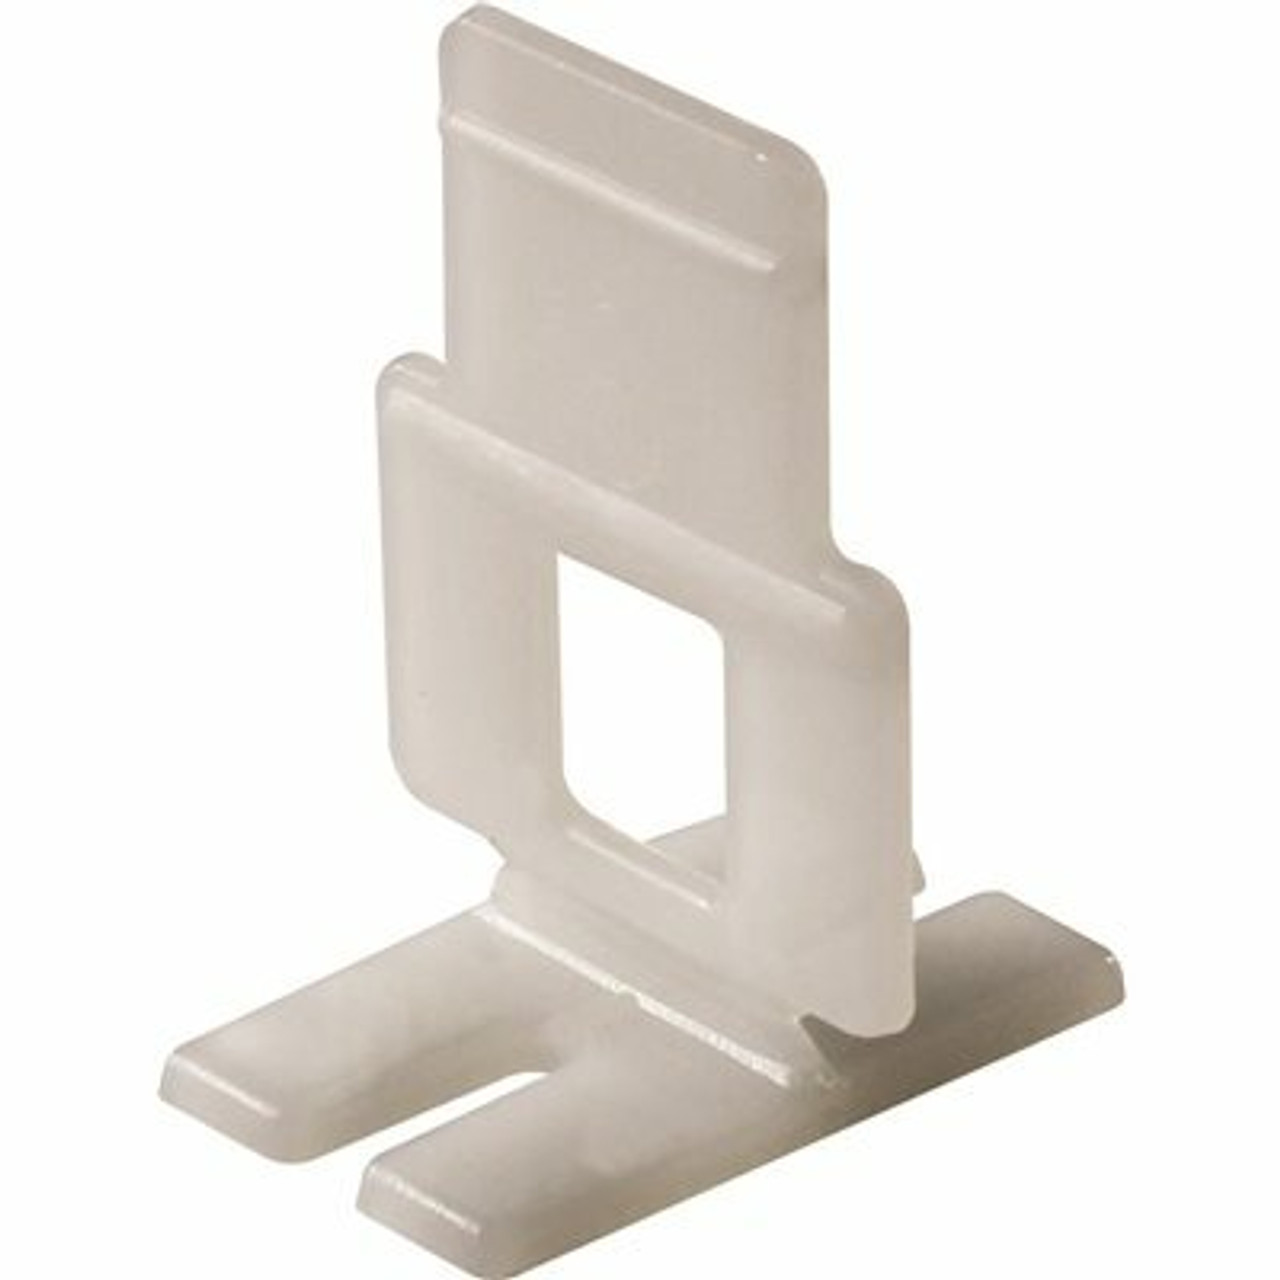 Qep Lash Flat Floor And Wall Tile Leveling System, Clips Part A (100-Pack)